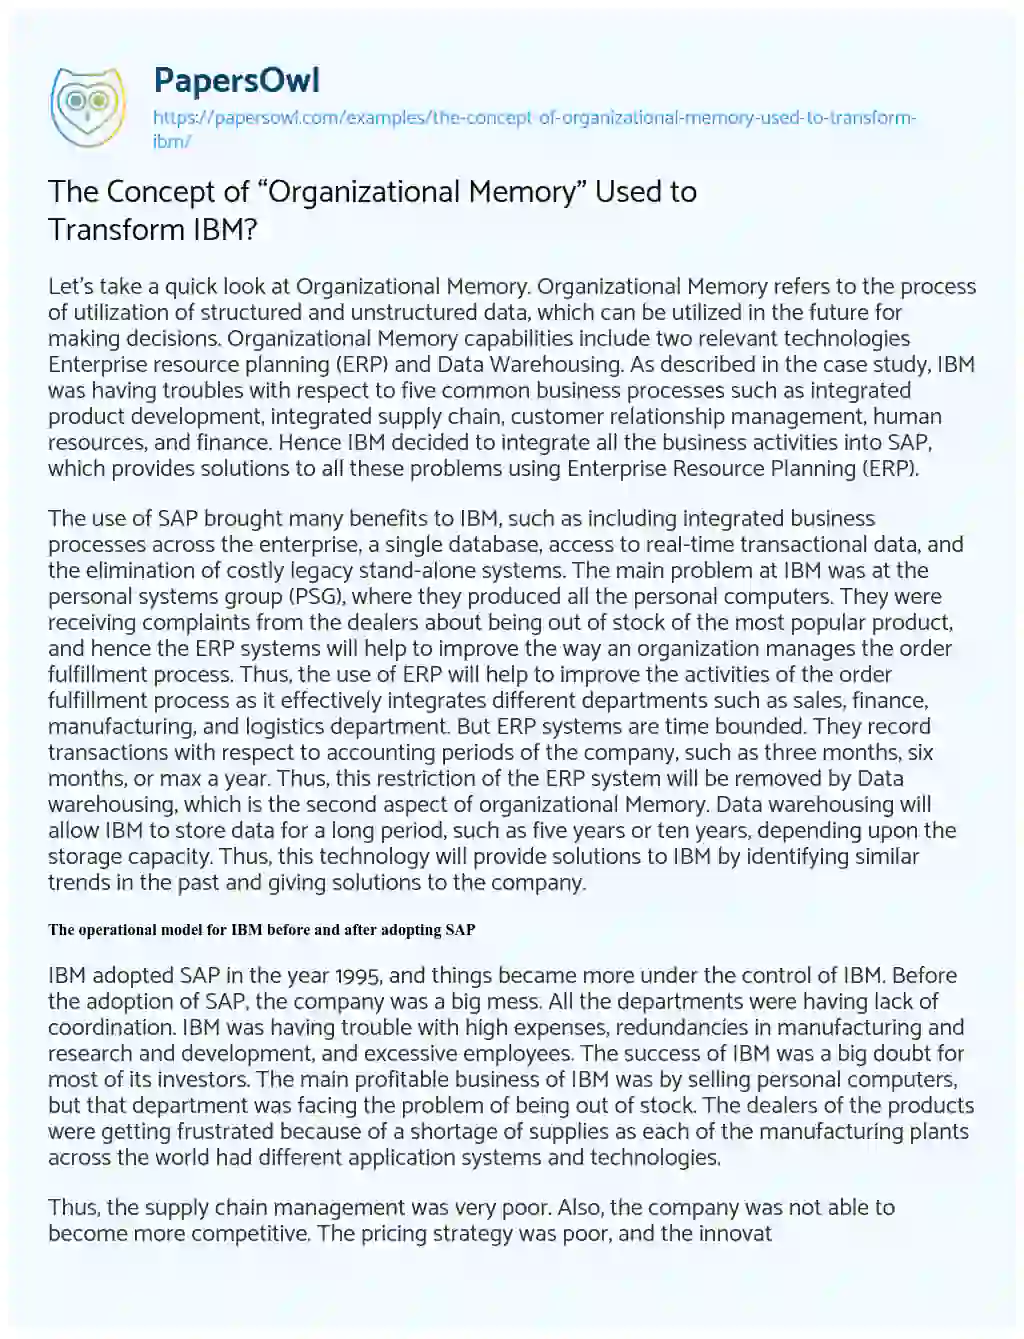 Essay on The Concept of “Organizational Memory” Used to Transform IBM?